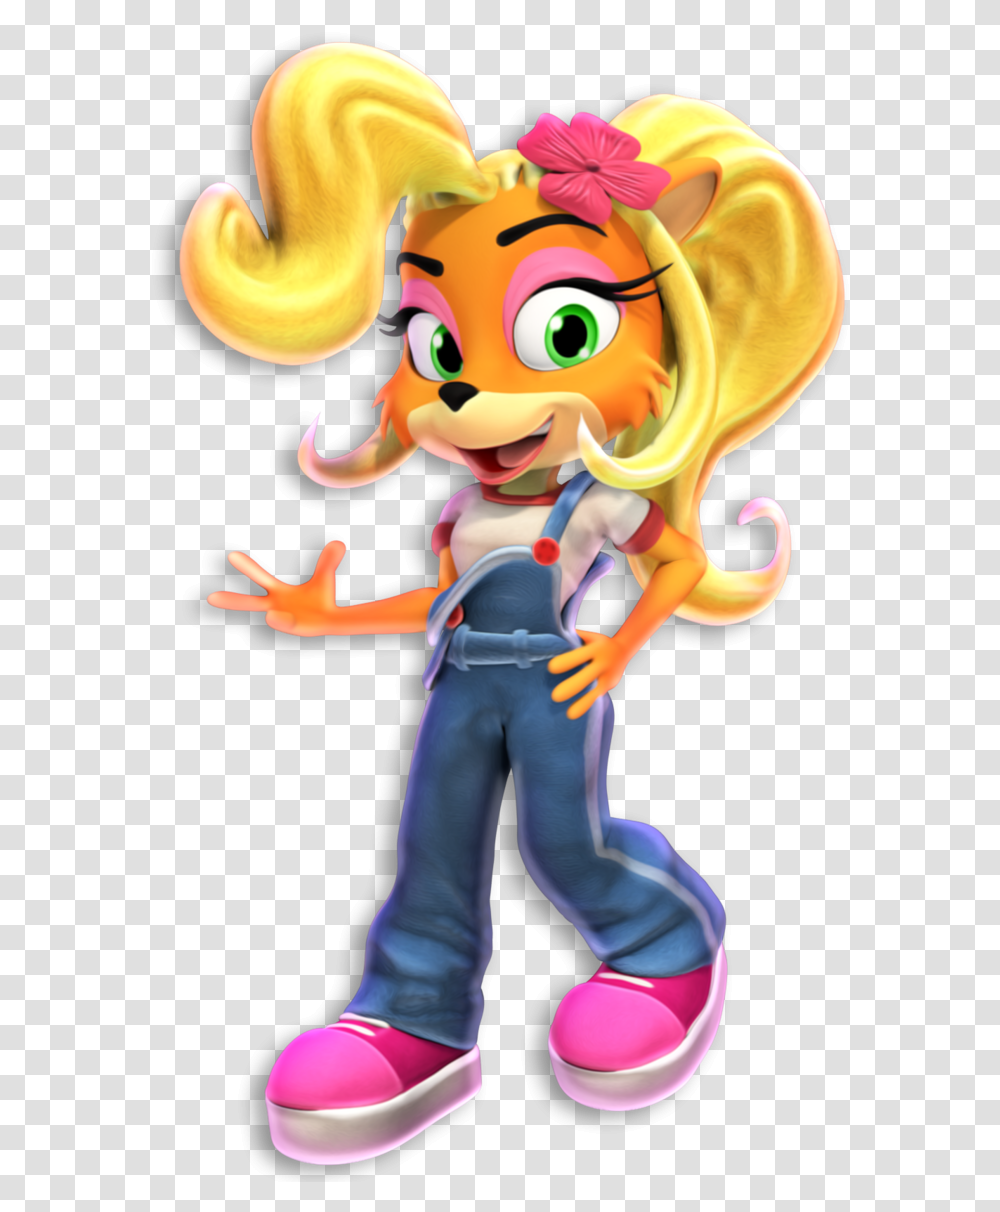 Made My Own Coco Bandicoot Model As Referenced From Crash Bandicoot N Sane Trilogy Coco, Person, Human, Figurine, Toy Transparent Png